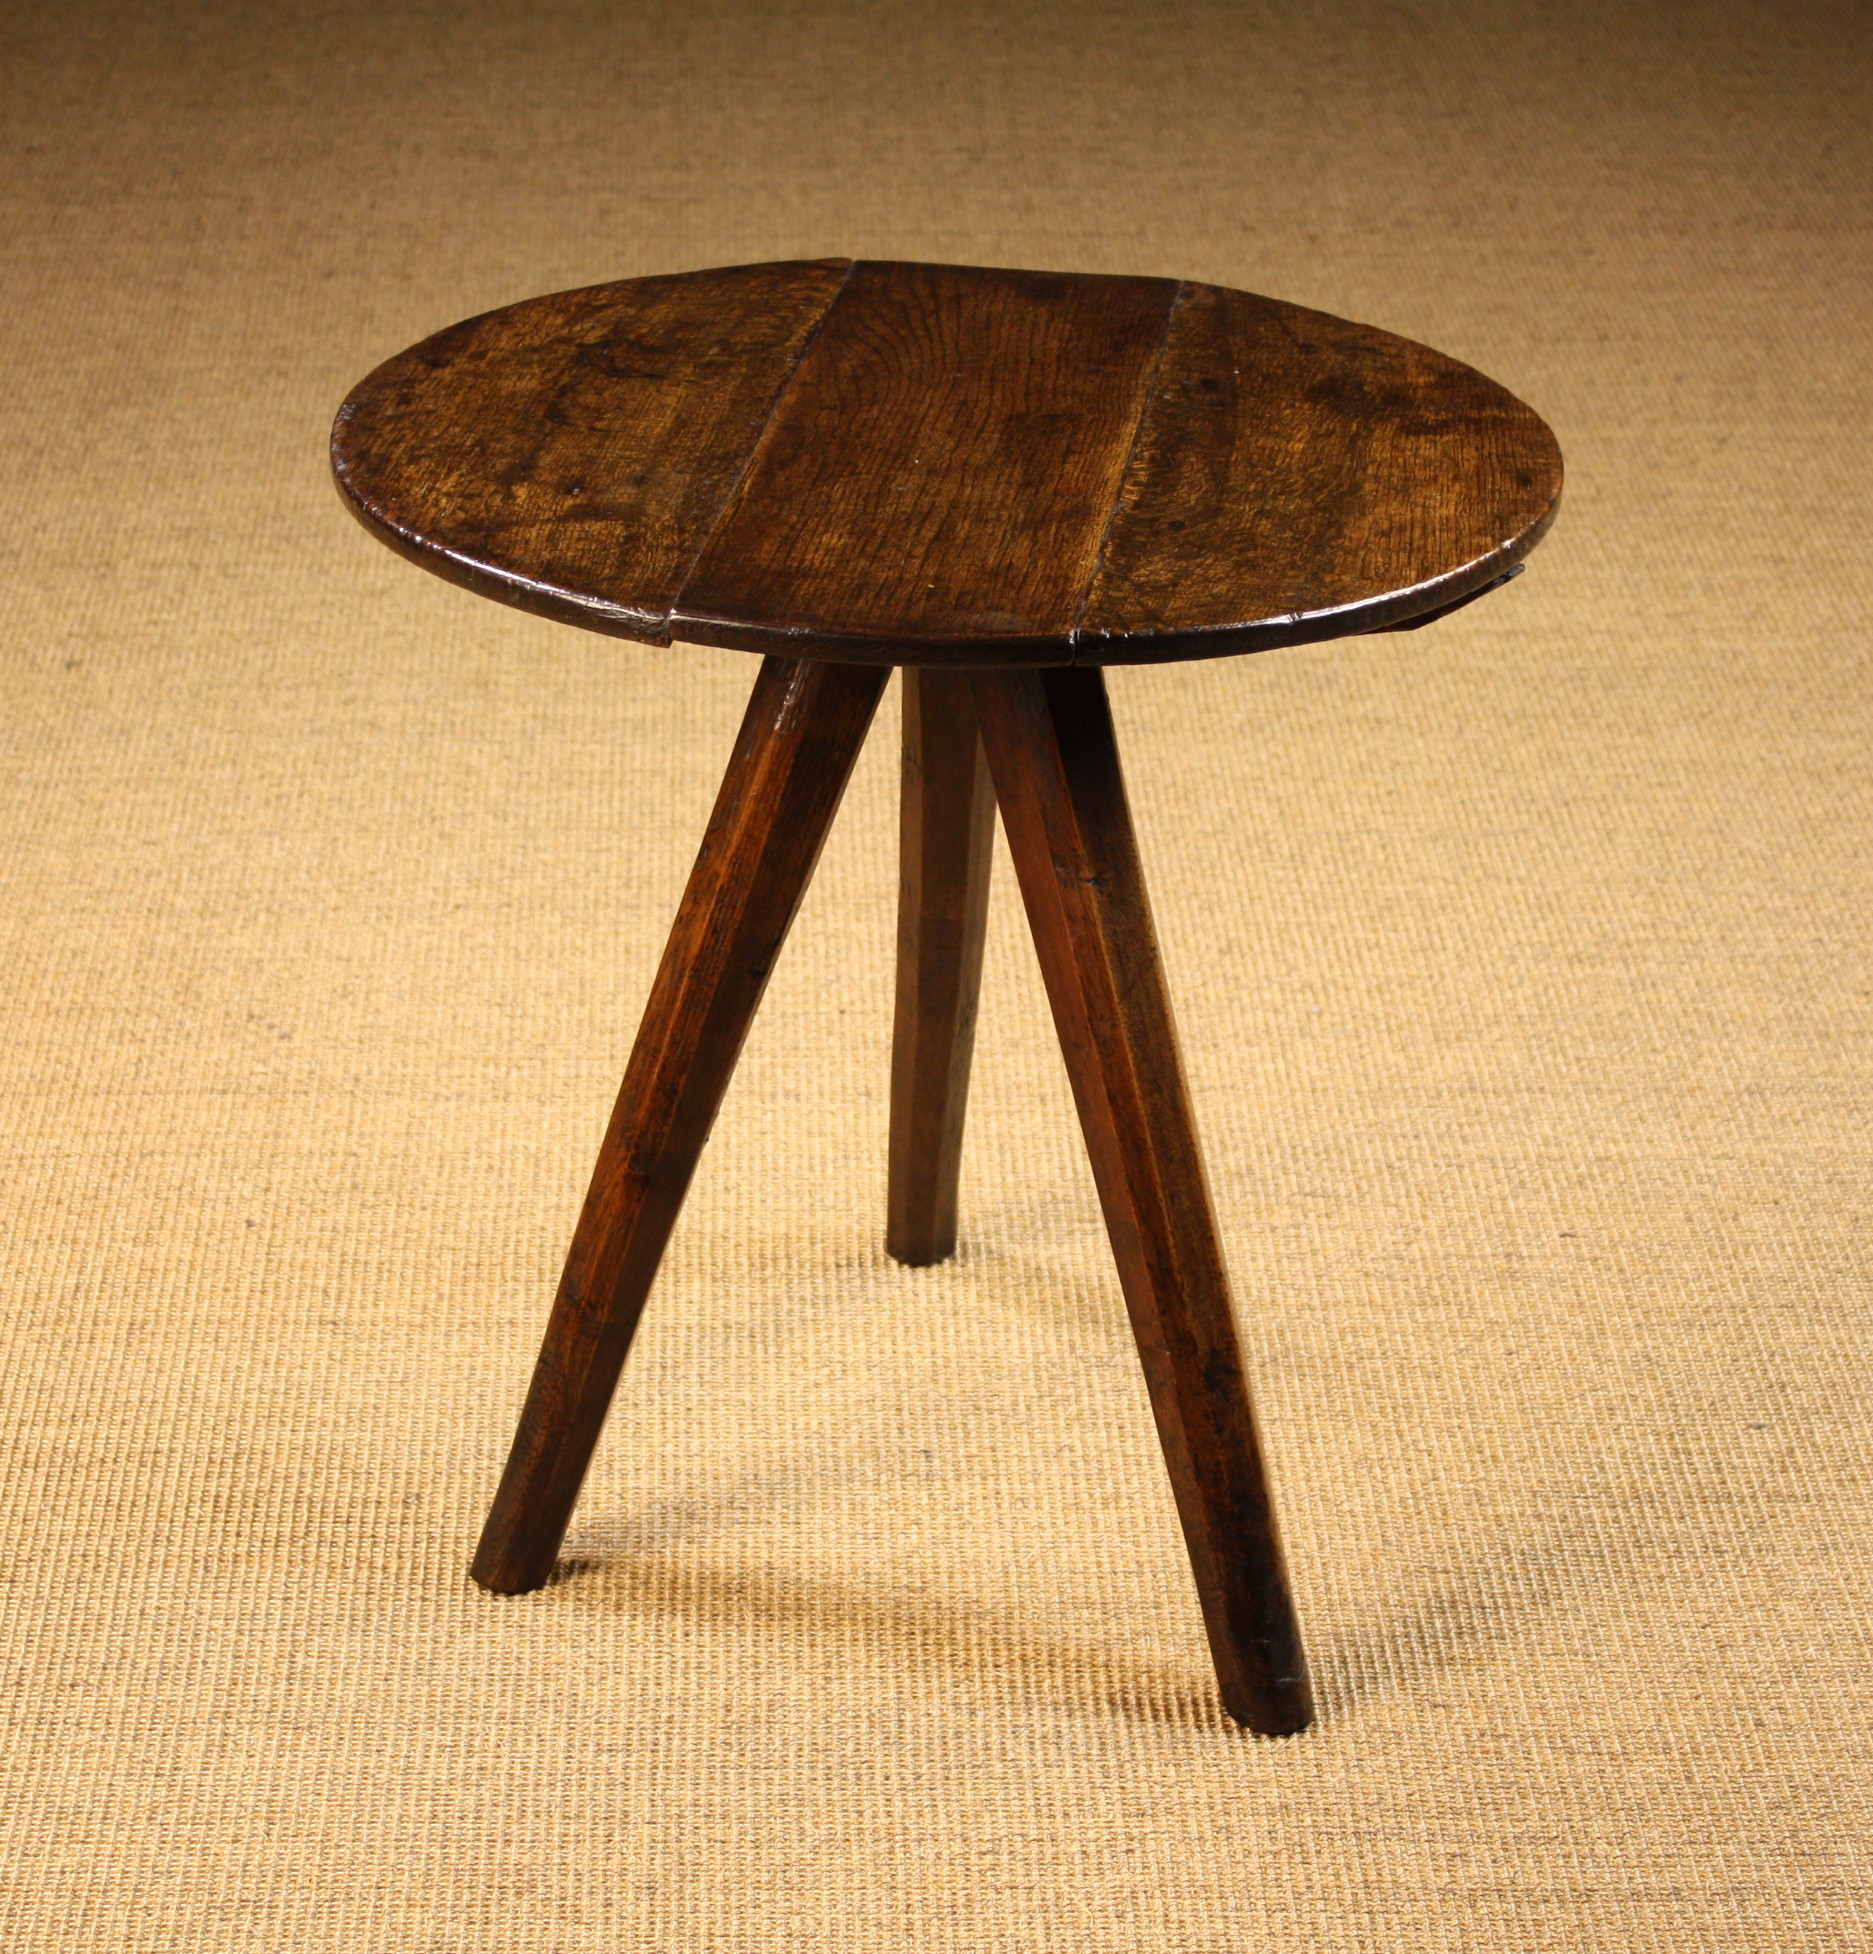 A Late 18th/Early 19th Century Oak Cricket Table standing on tapering chamfered legs, 21 ins (55